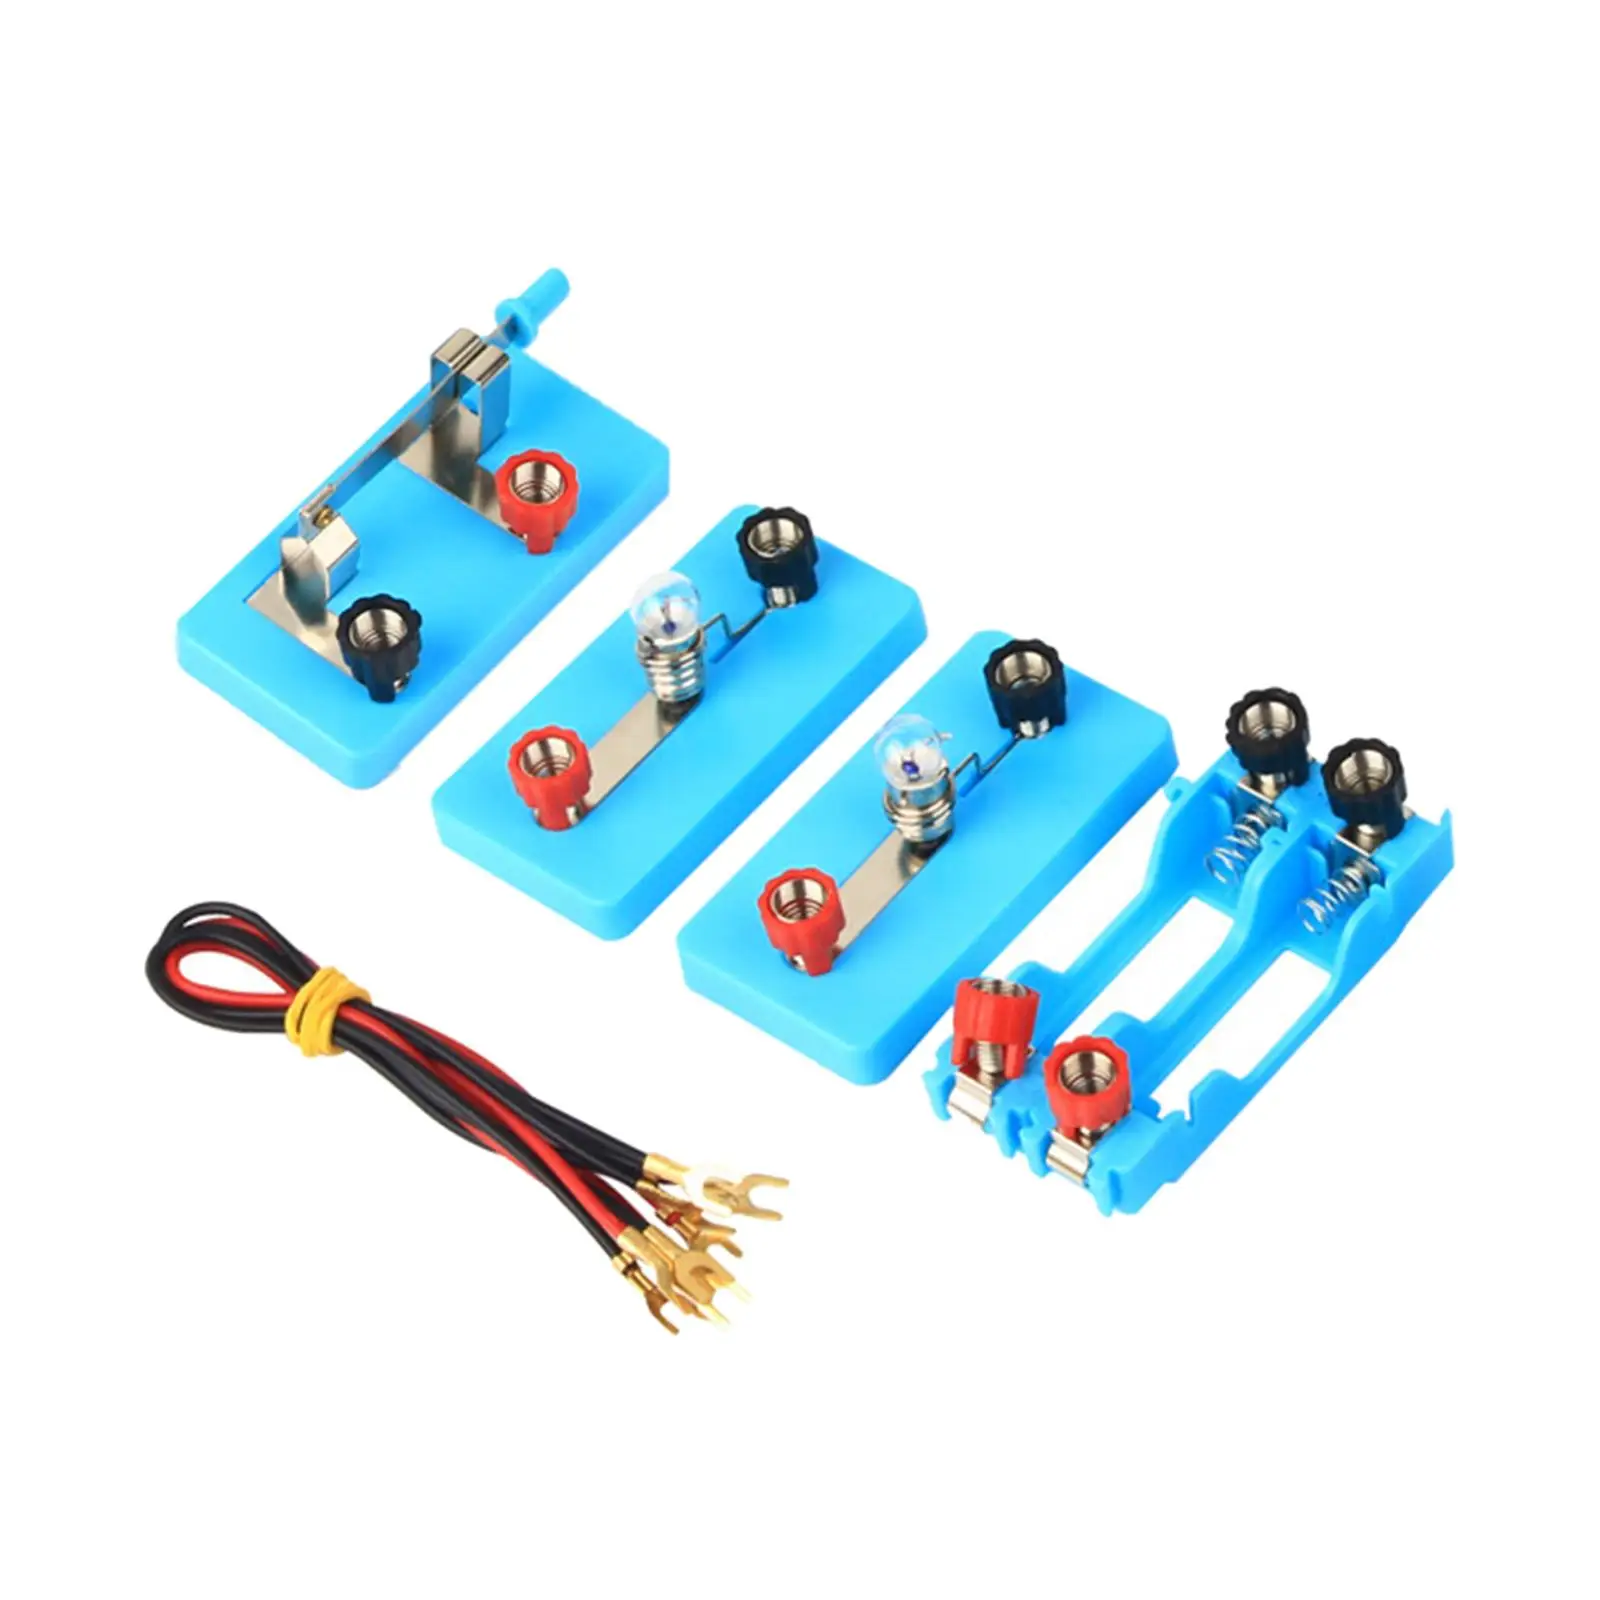 

Physics Science Kits Circuit Experiment Small Inventions Developing Intelligent Basic Circuit Kits for Teaching Aids Kids Teens